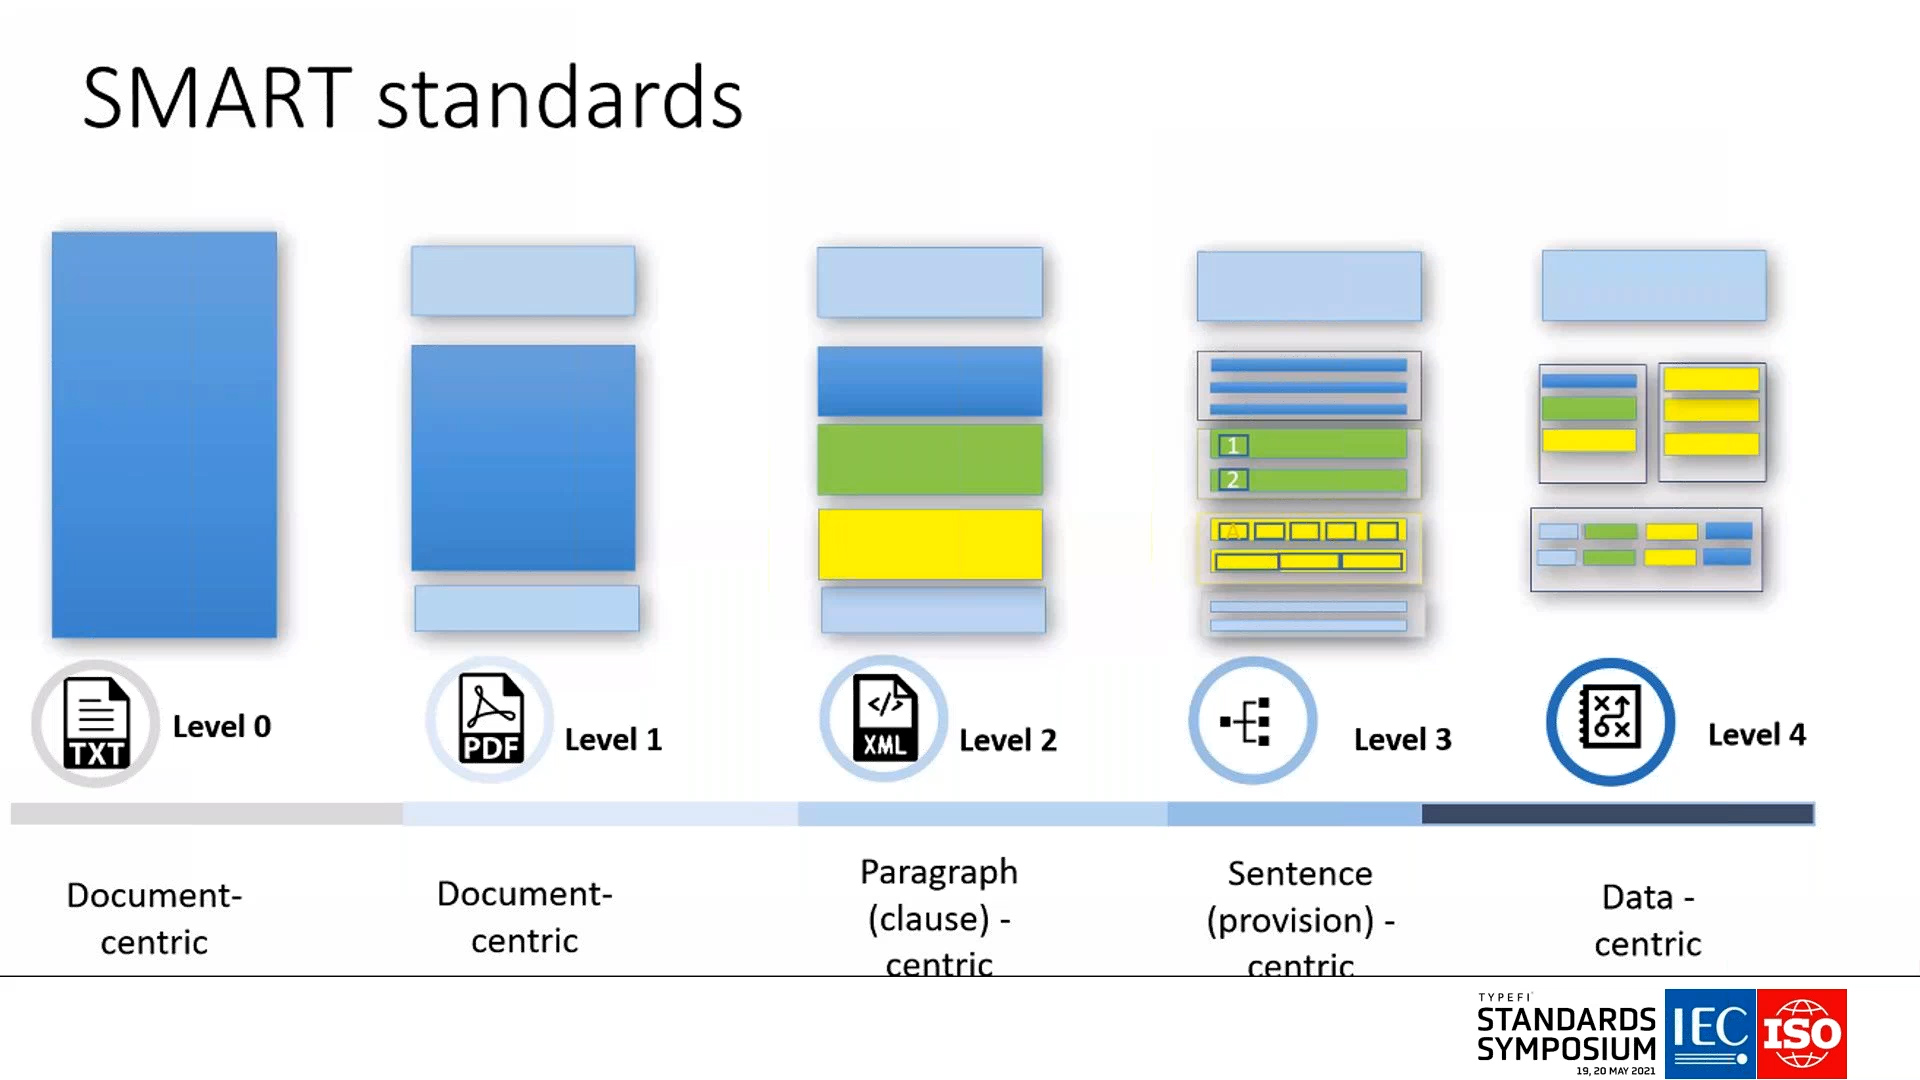 ISO SMART standards diagram, showing an increasing level of granularity at each stage. Level 0 text files and Level 1 PDFs are viewed as whole documents. Levels 3 to 5 are XML, increasingly broken down into paragraphs, sentences, and data pieces.